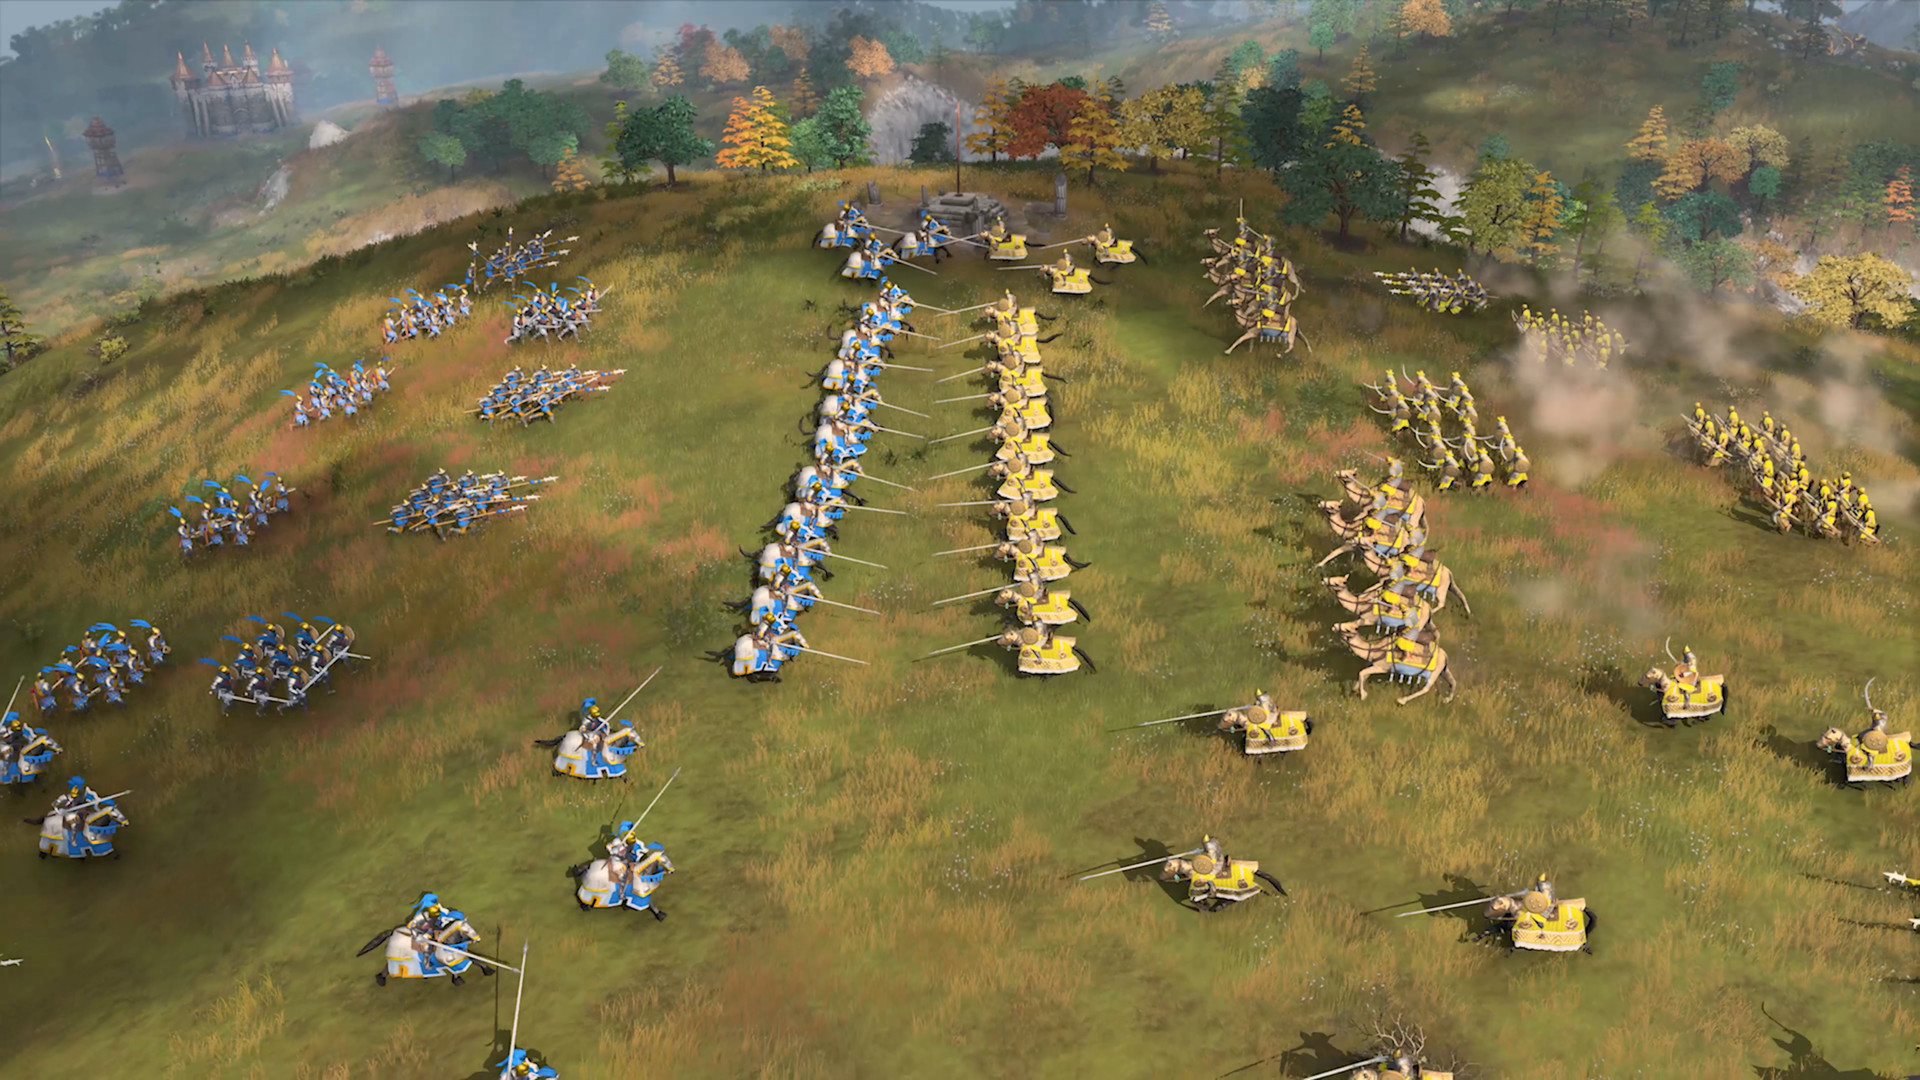 The Age of Empires 4 beta starts this week